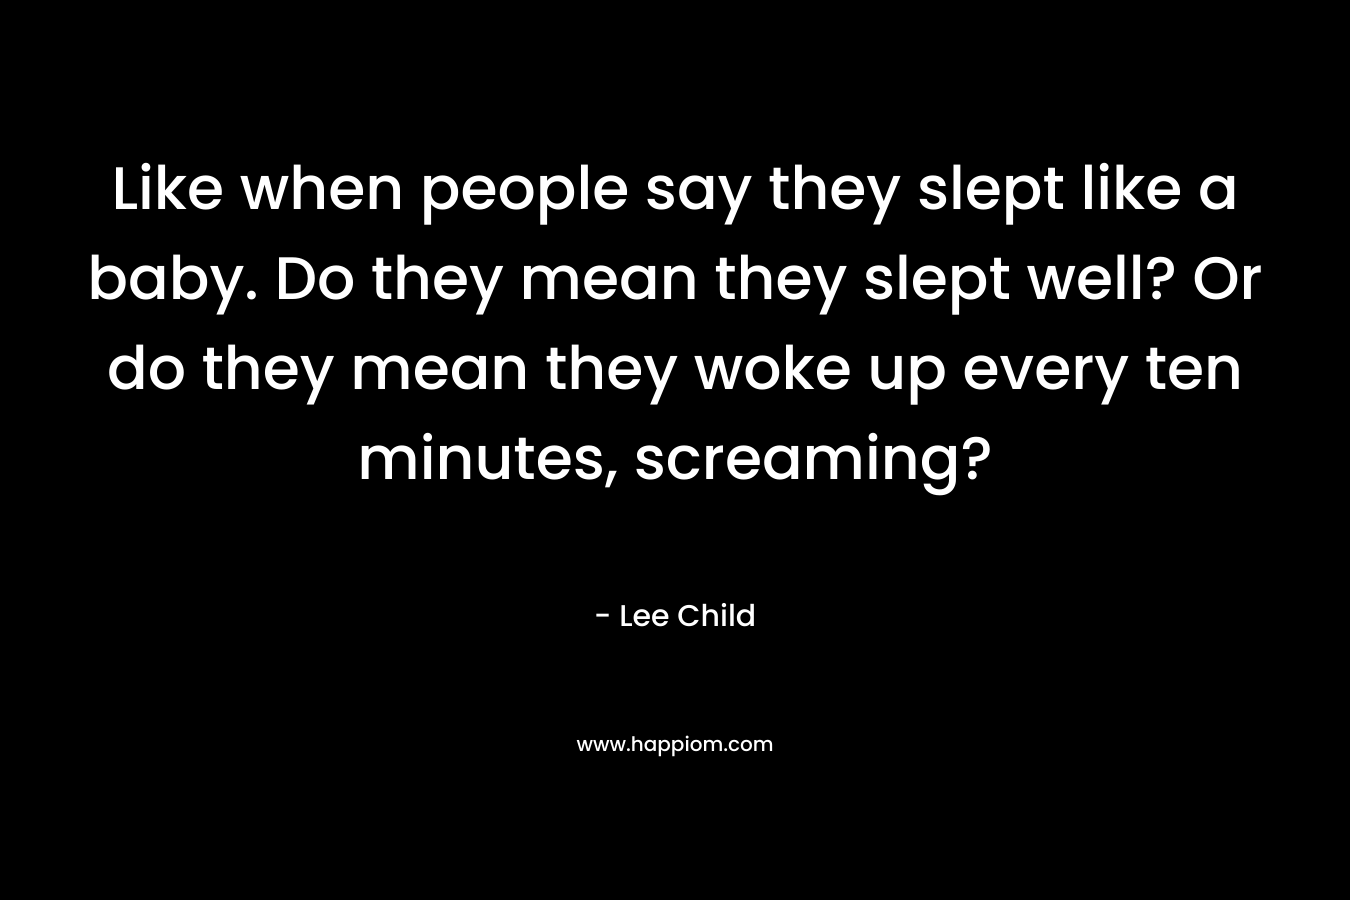 Like when people say they slept like a baby. Do they mean they slept well? Or do they mean they woke up every ten minutes, screaming?